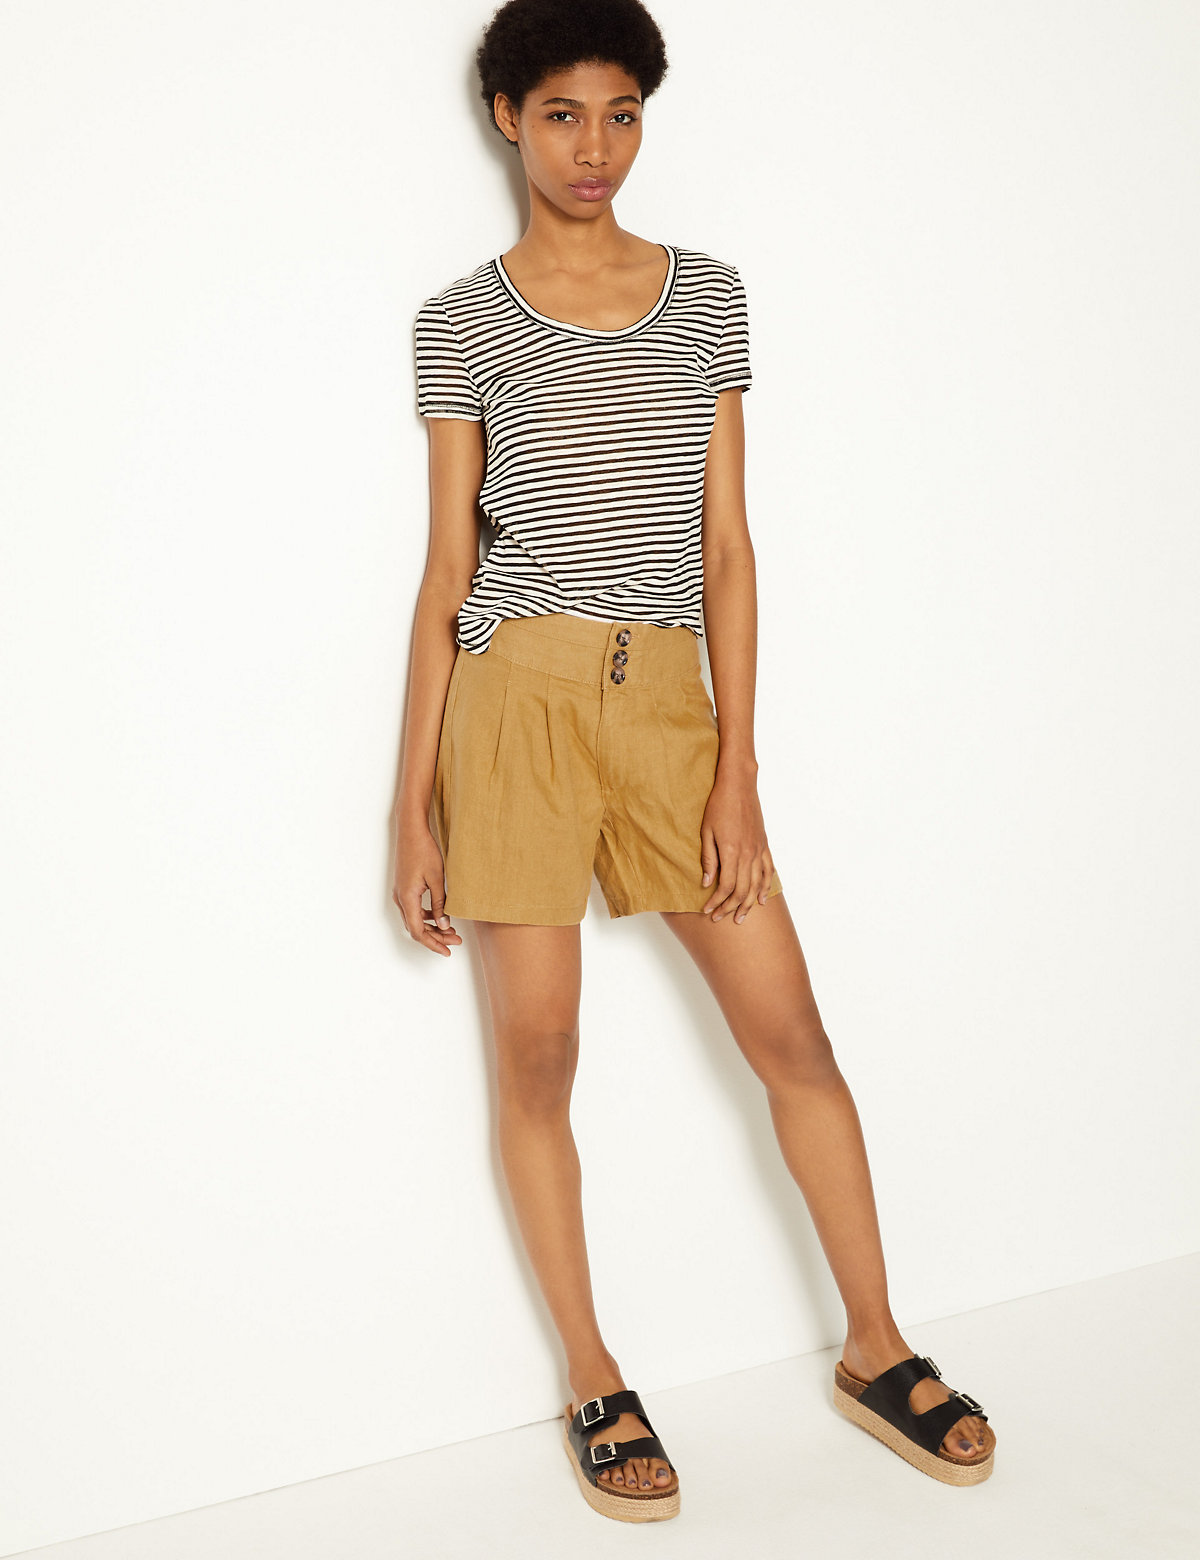 Pleated Front Pure Linen Shorts